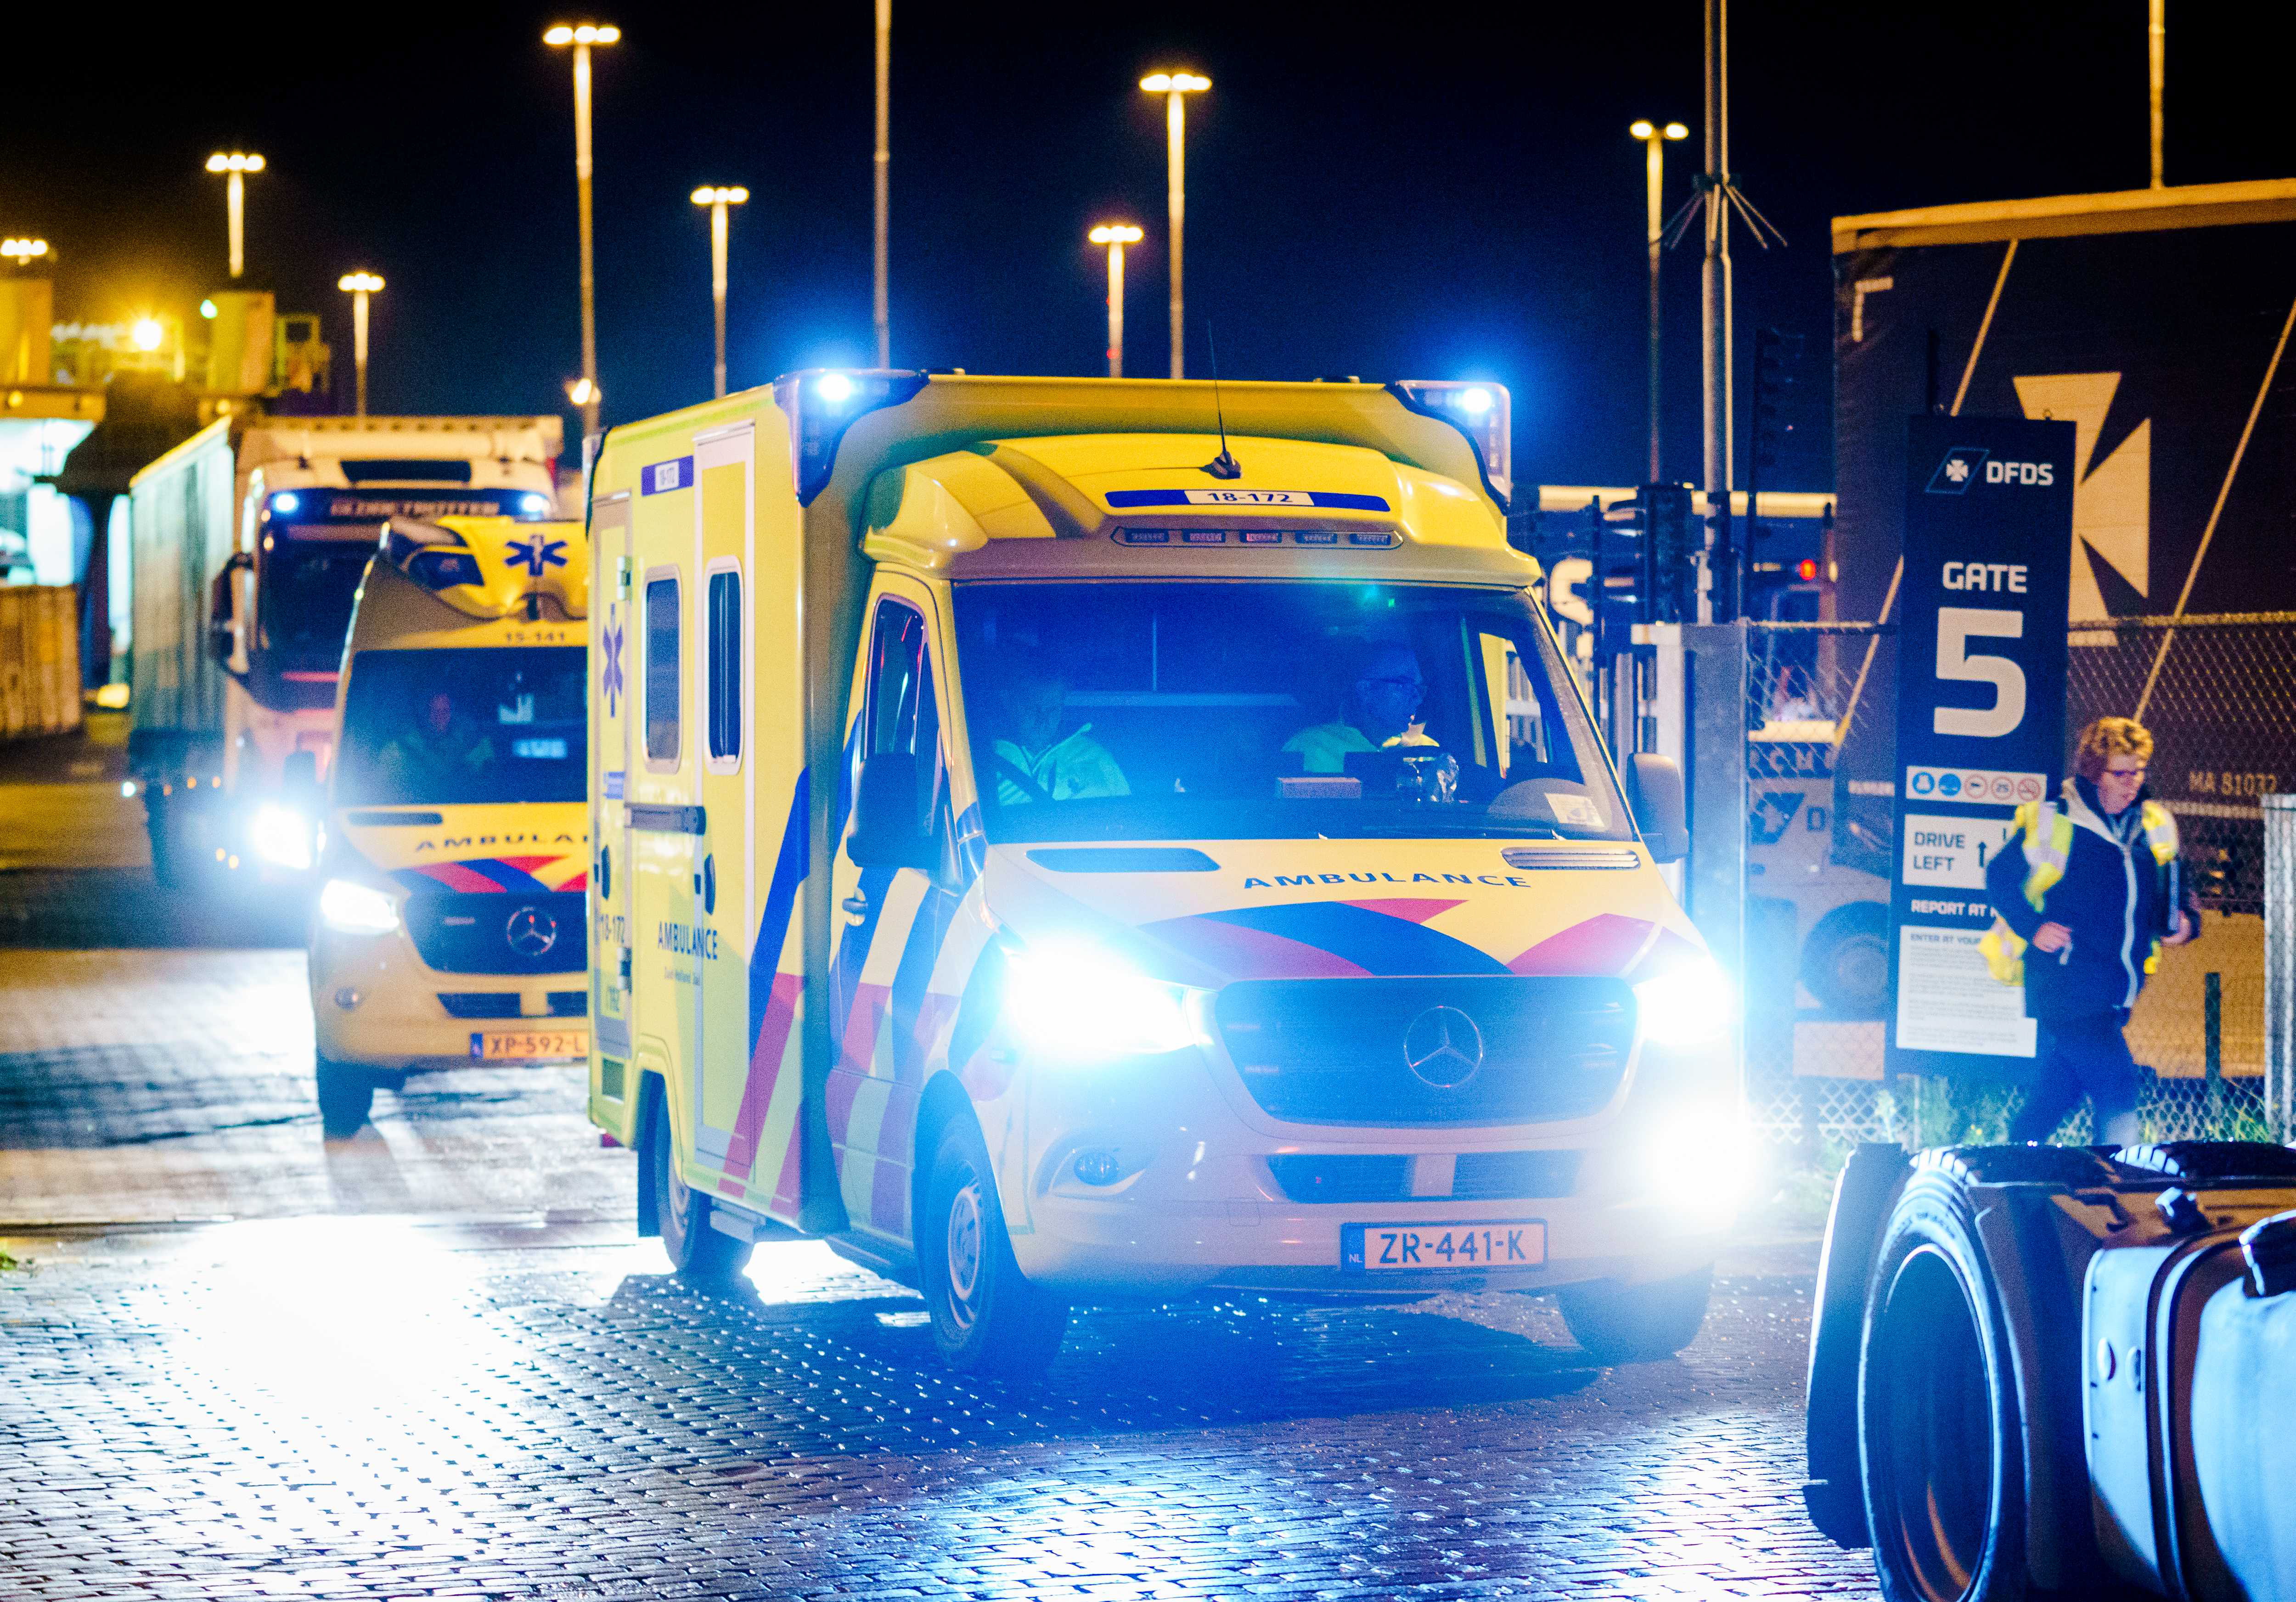 epa08009761 Emergency services at the Vulcaanhaven where 25 stowaways were found in DFDS ferry in the harbor of Vlaardingen, The Netherlands, 19 November 2019. According to reports, at least 26 stowaways were found in a refrigerated container on a ferry en route to the UK. The Britannia Seaways ferry has returned after the people had been found.  EPA/MARCO DE SWART